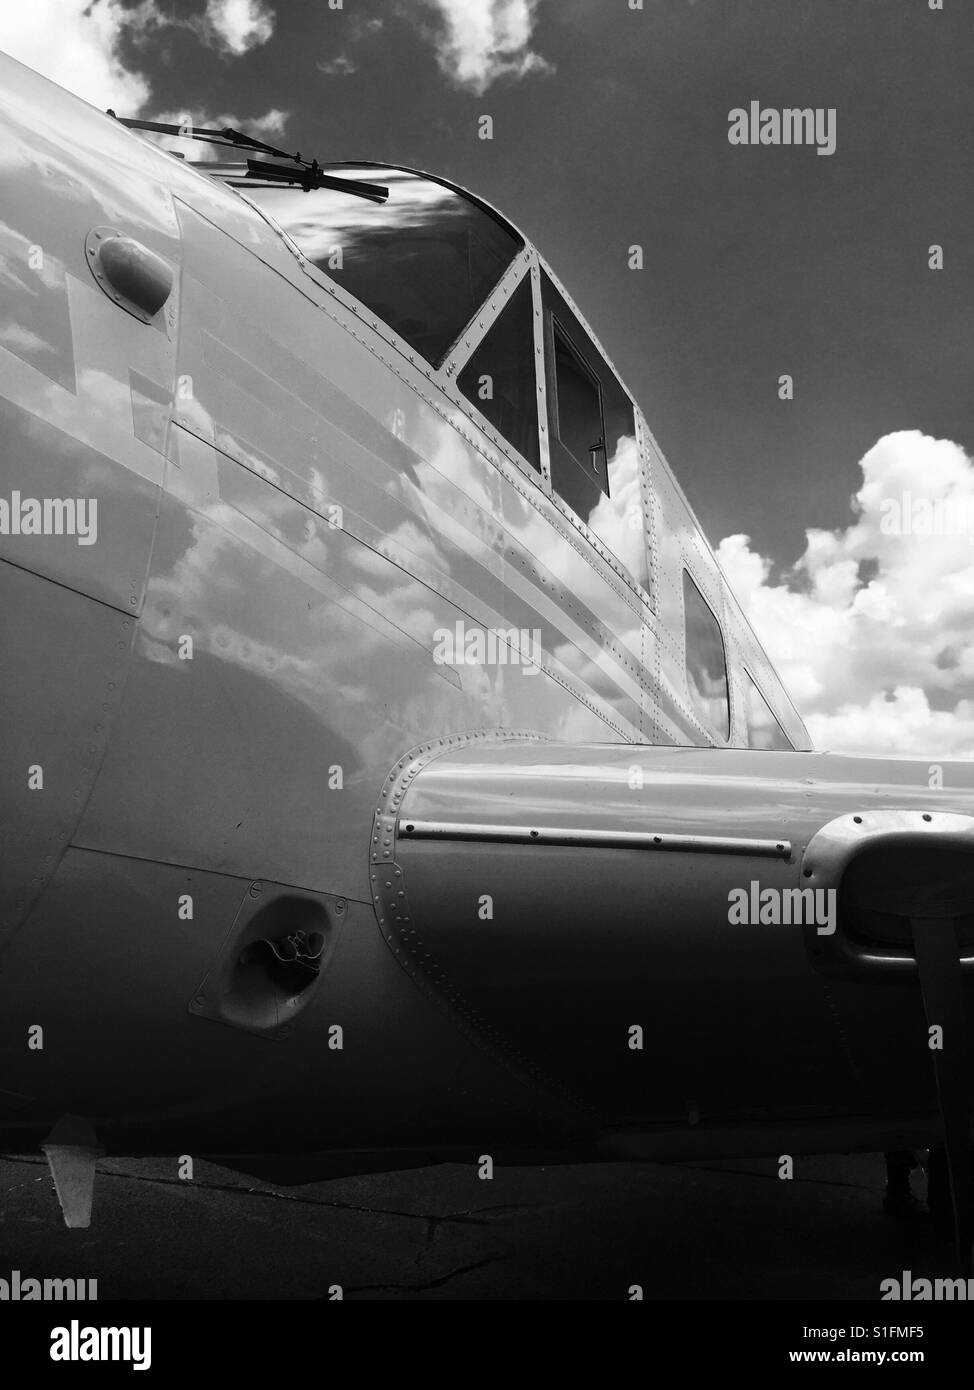 Classic aircraft with sky reflection Stock Photo